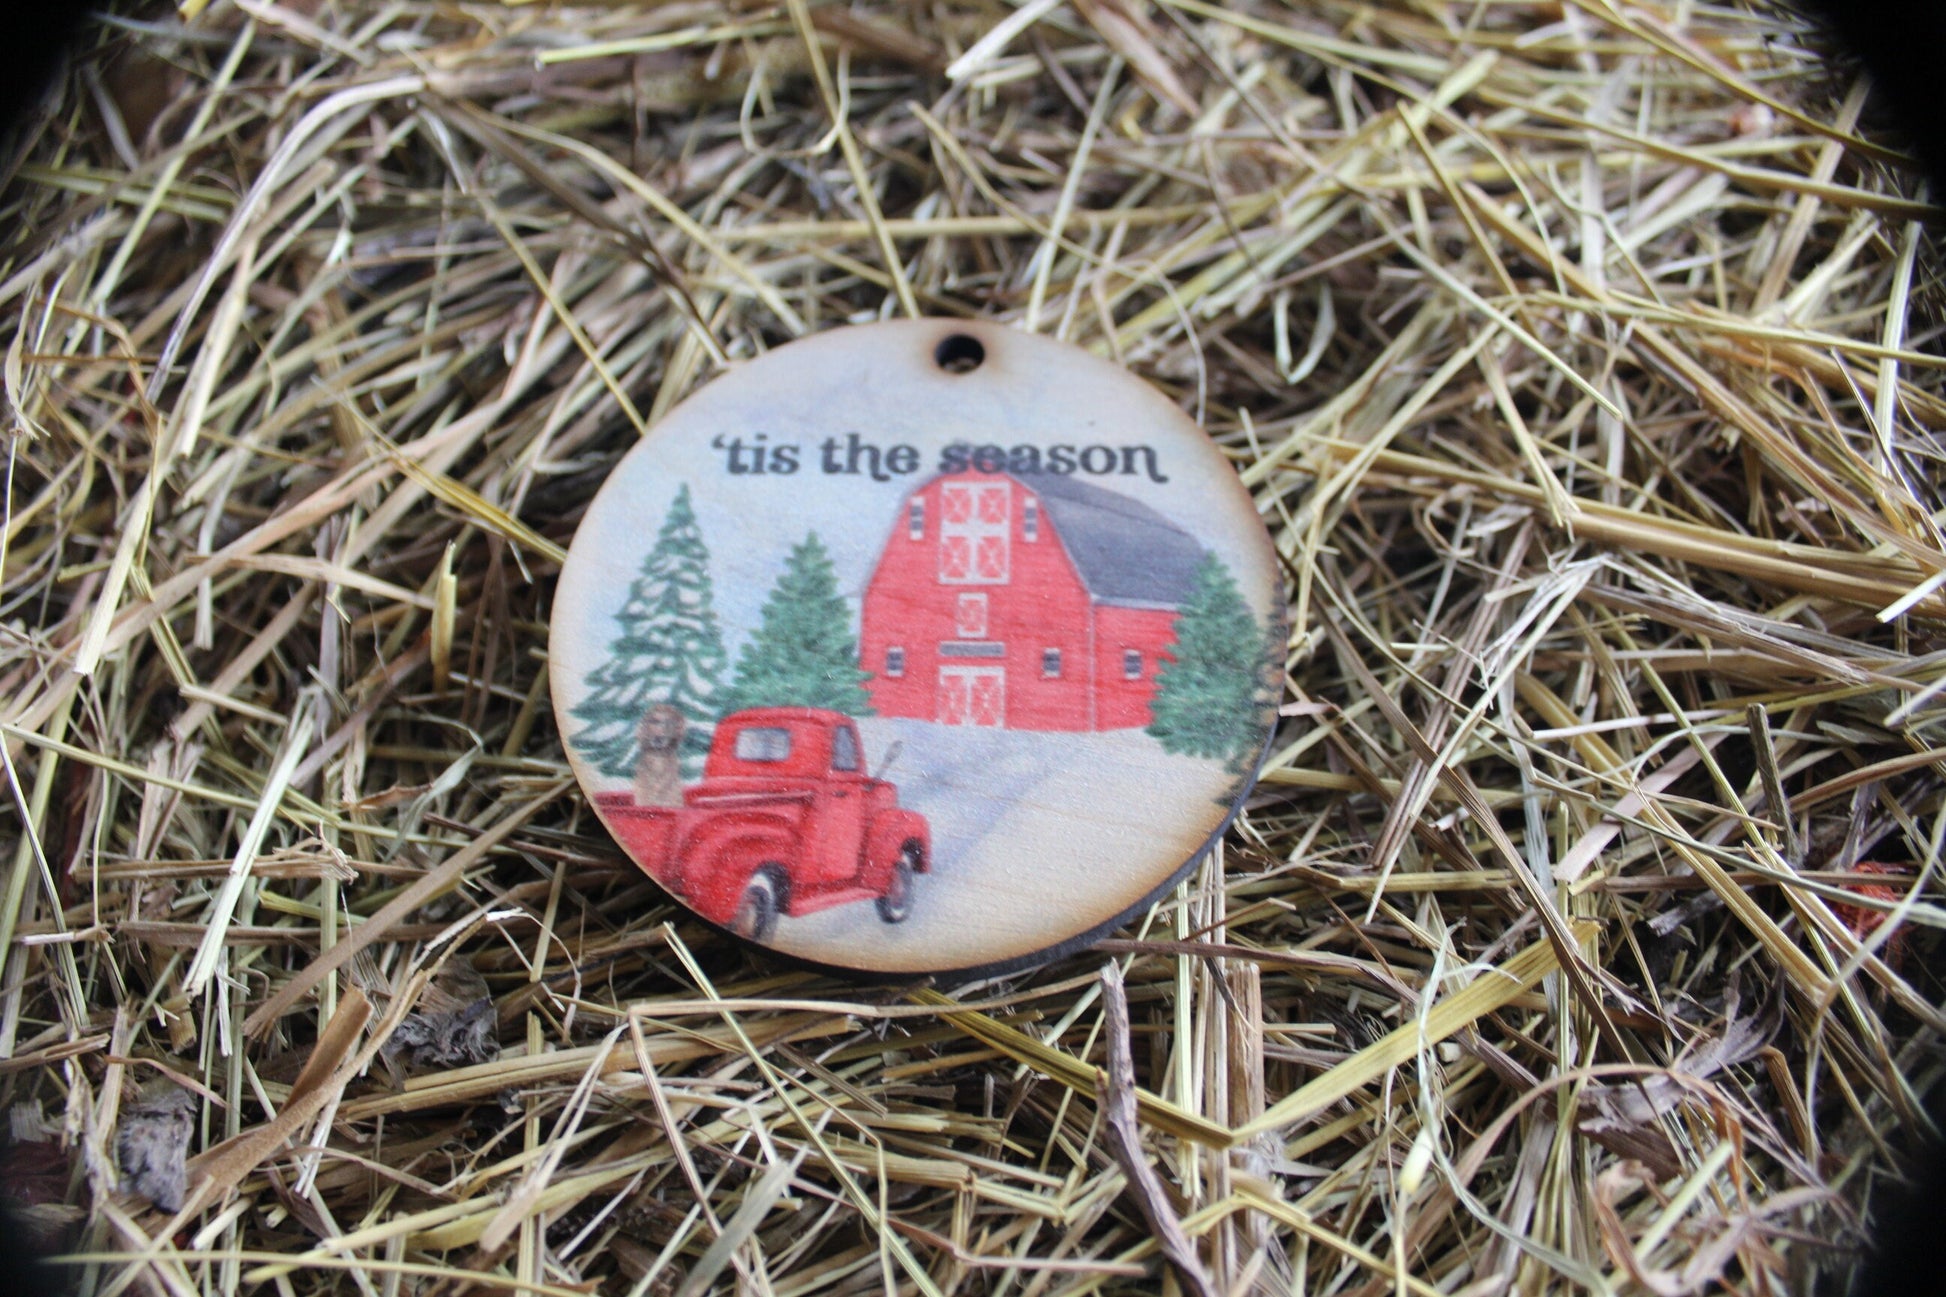 Tis The Season Little Truck Barn Red Winter Christmas Holiday Ornament KeyChain Gift Tag Woodslice Round Printed Image Winter Scene Vintage